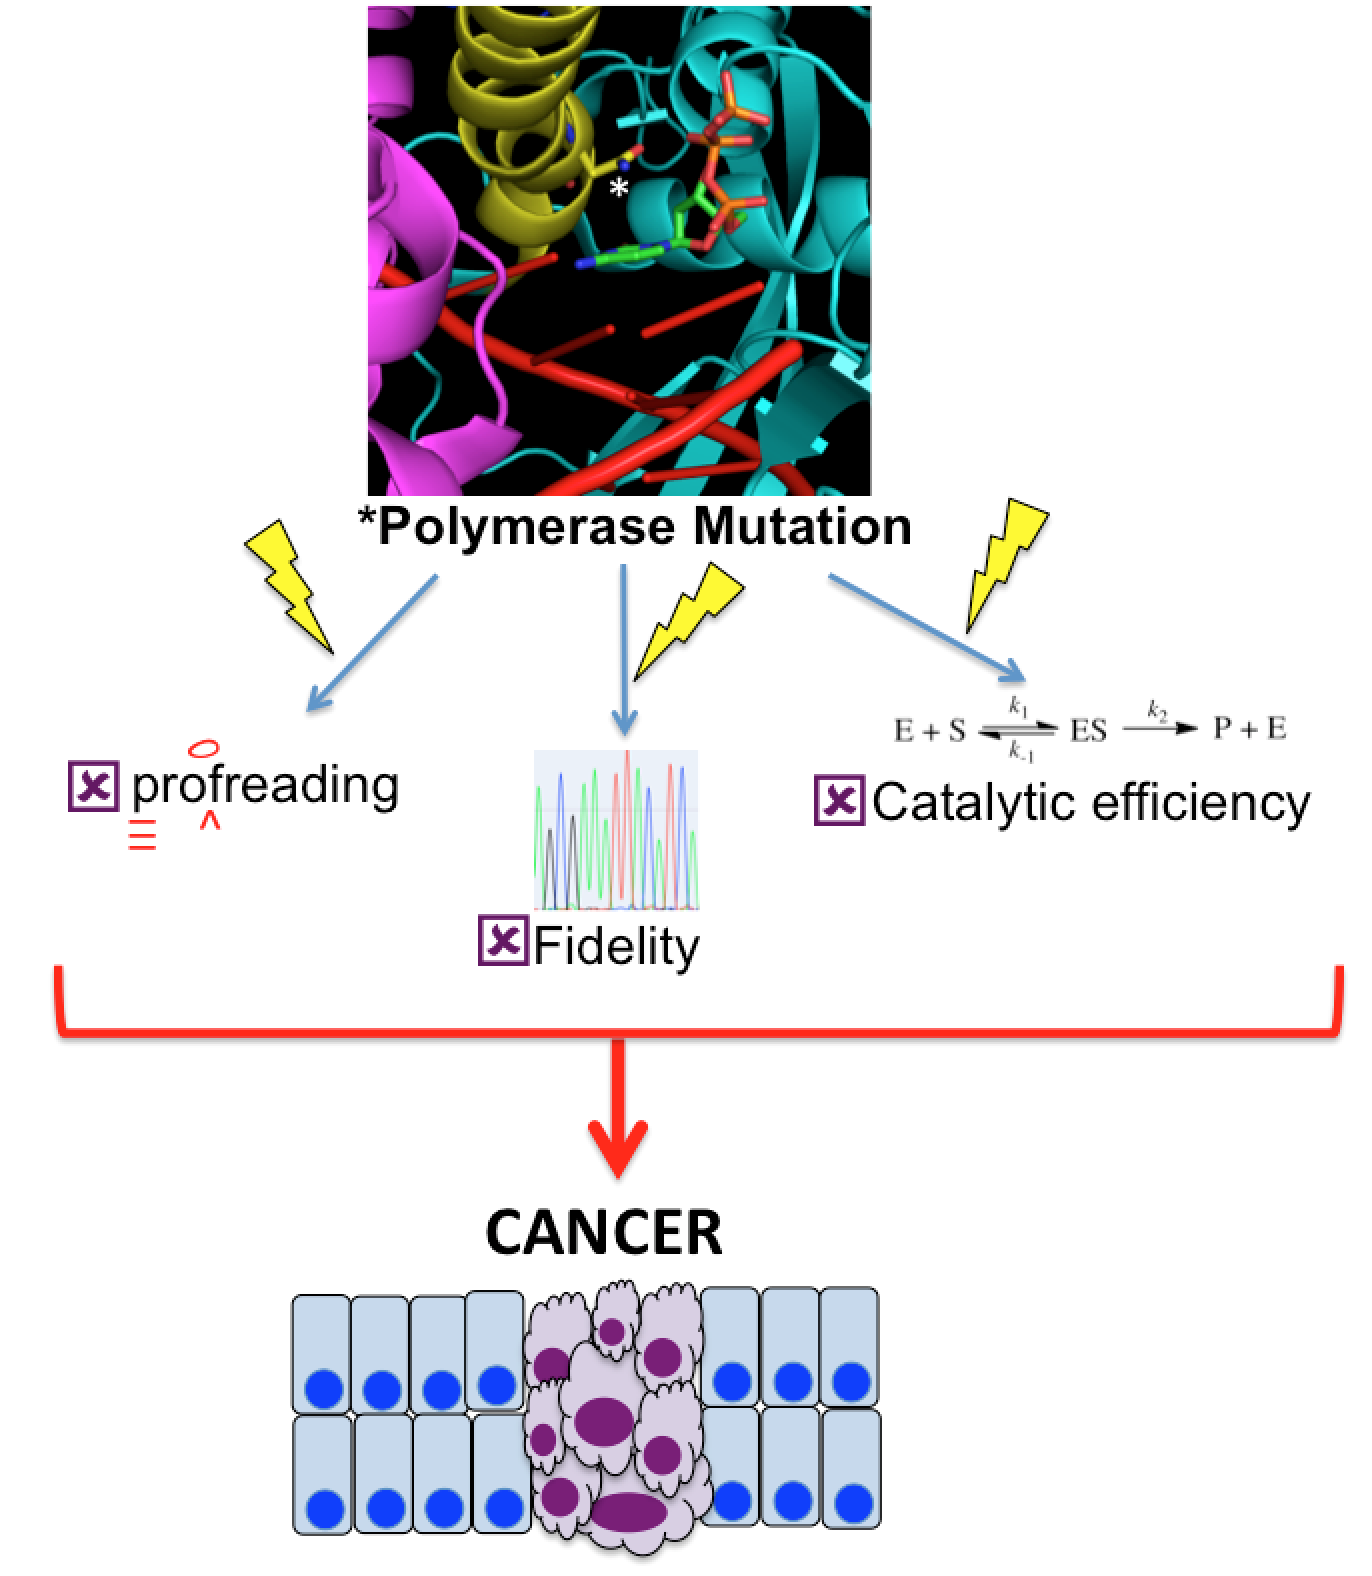 polymerase mutation and cancer